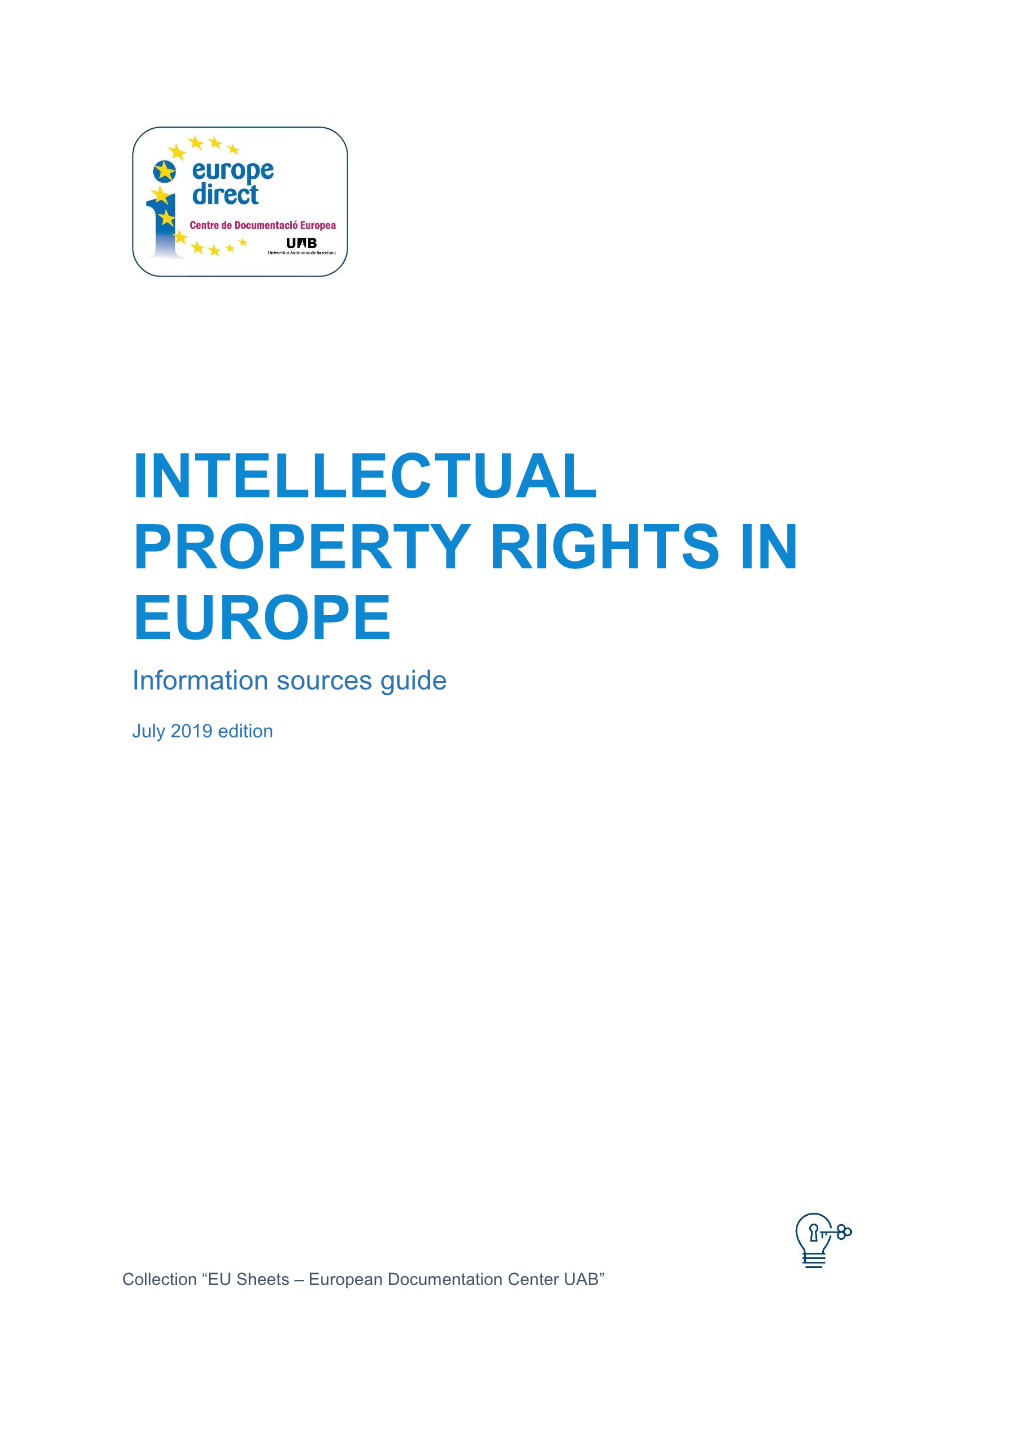 INTELLECTUAL PROPERTY RIGHTS in EUROPE Information Sources Guide